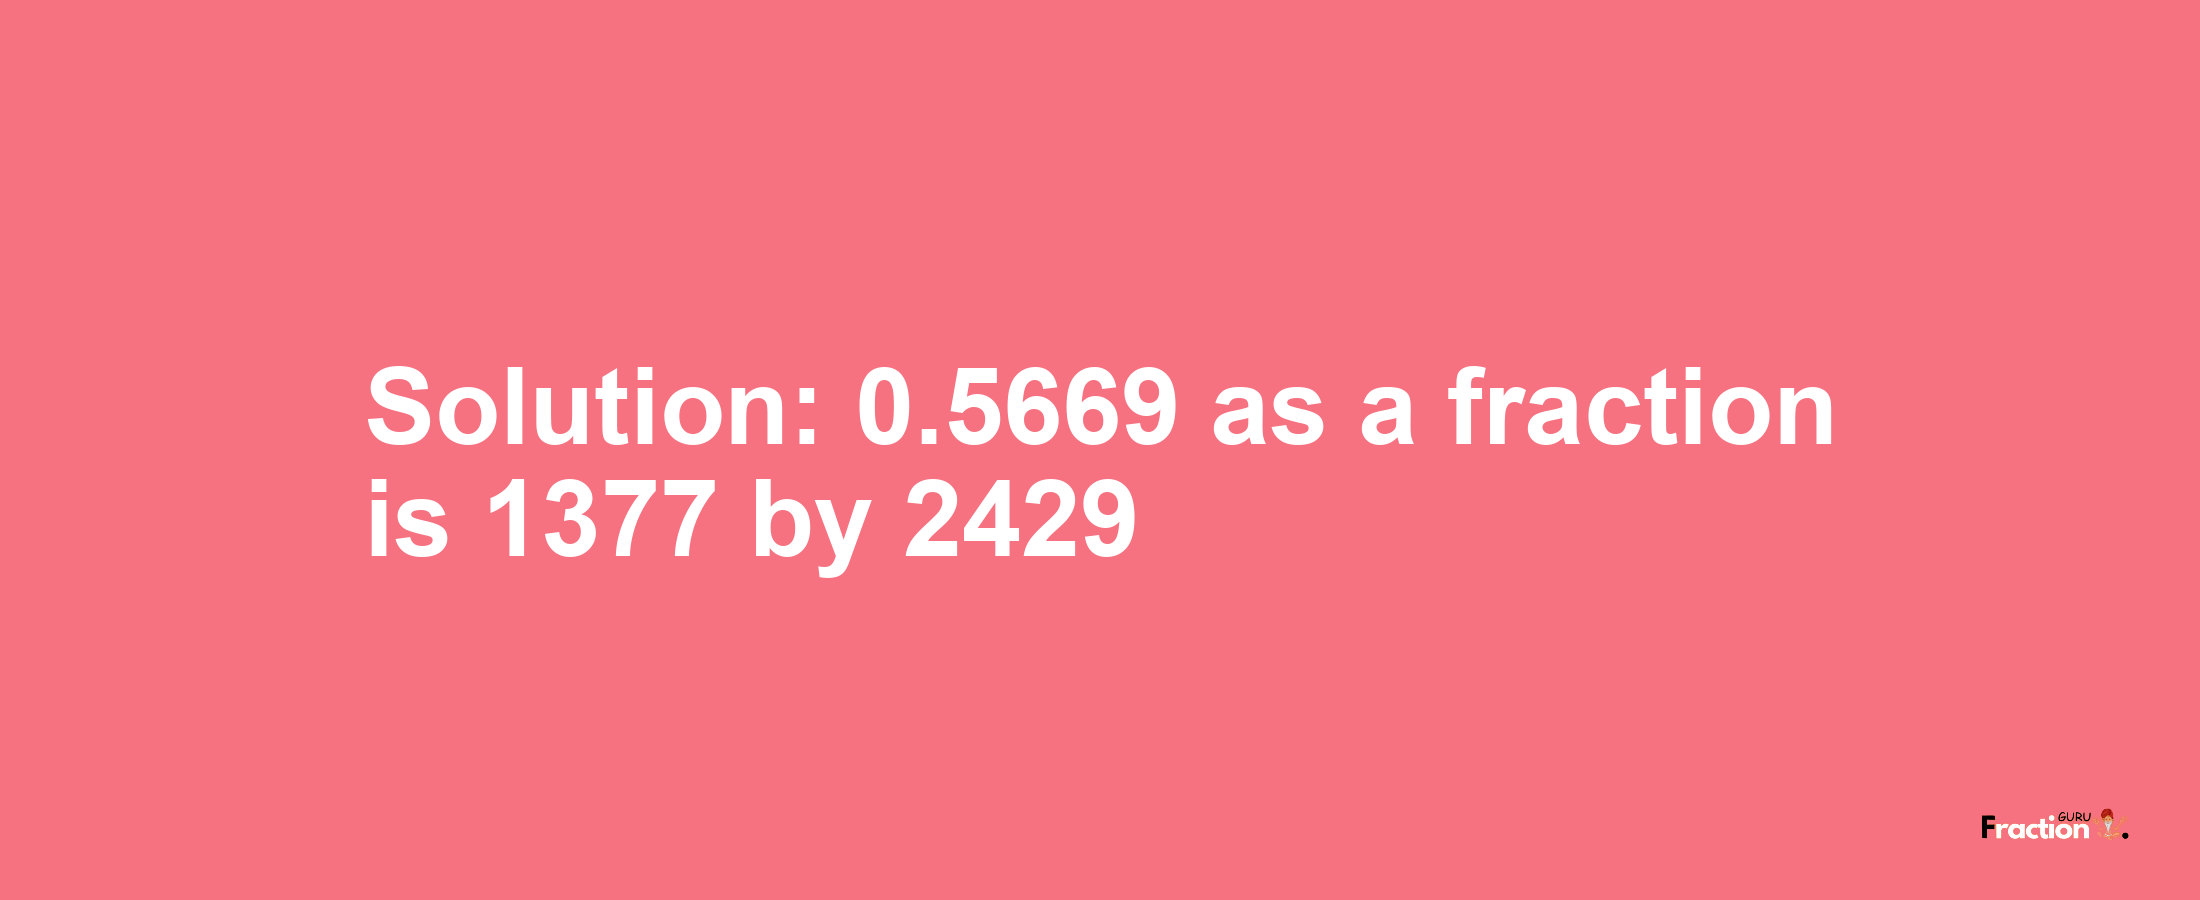 Solution:0.5669 as a fraction is 1377/2429